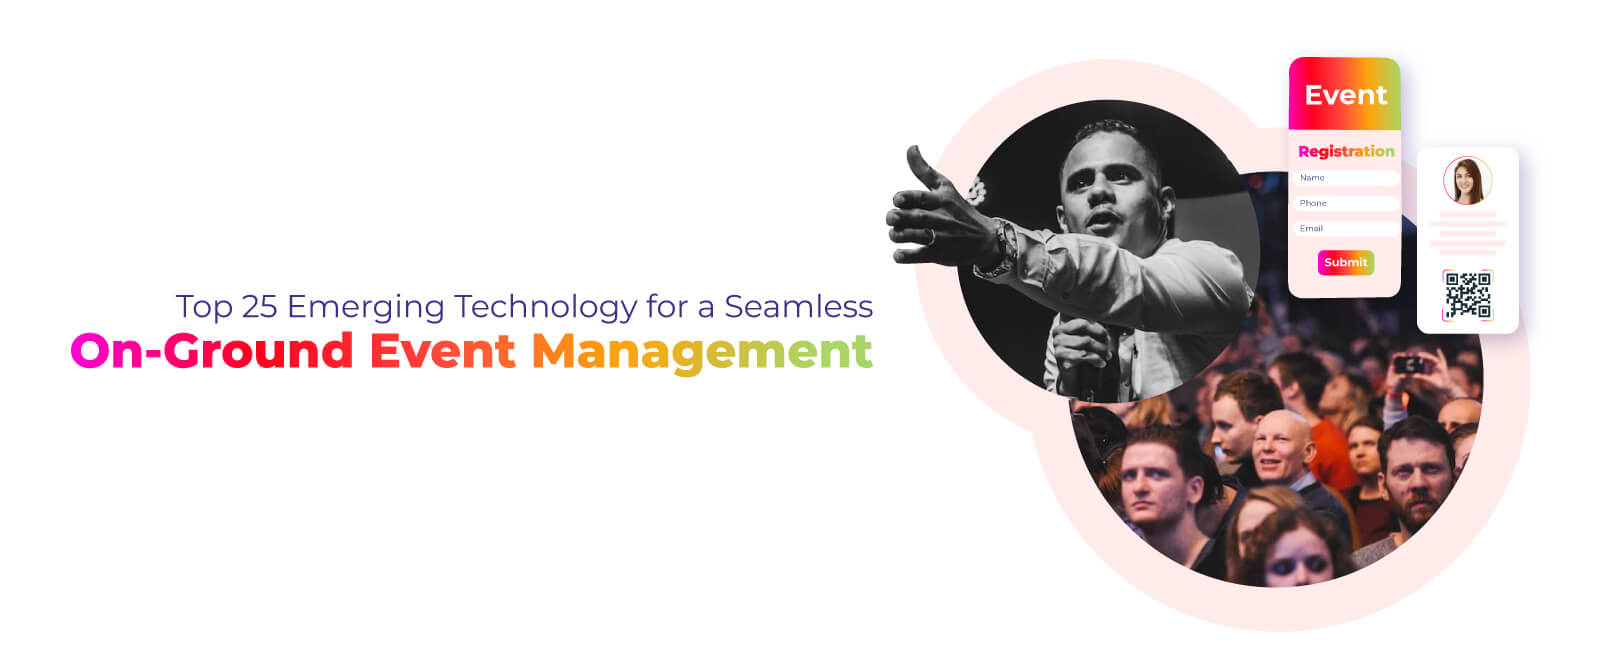 Top 25 Emerging Technology for a Seamless On-Ground Event Management